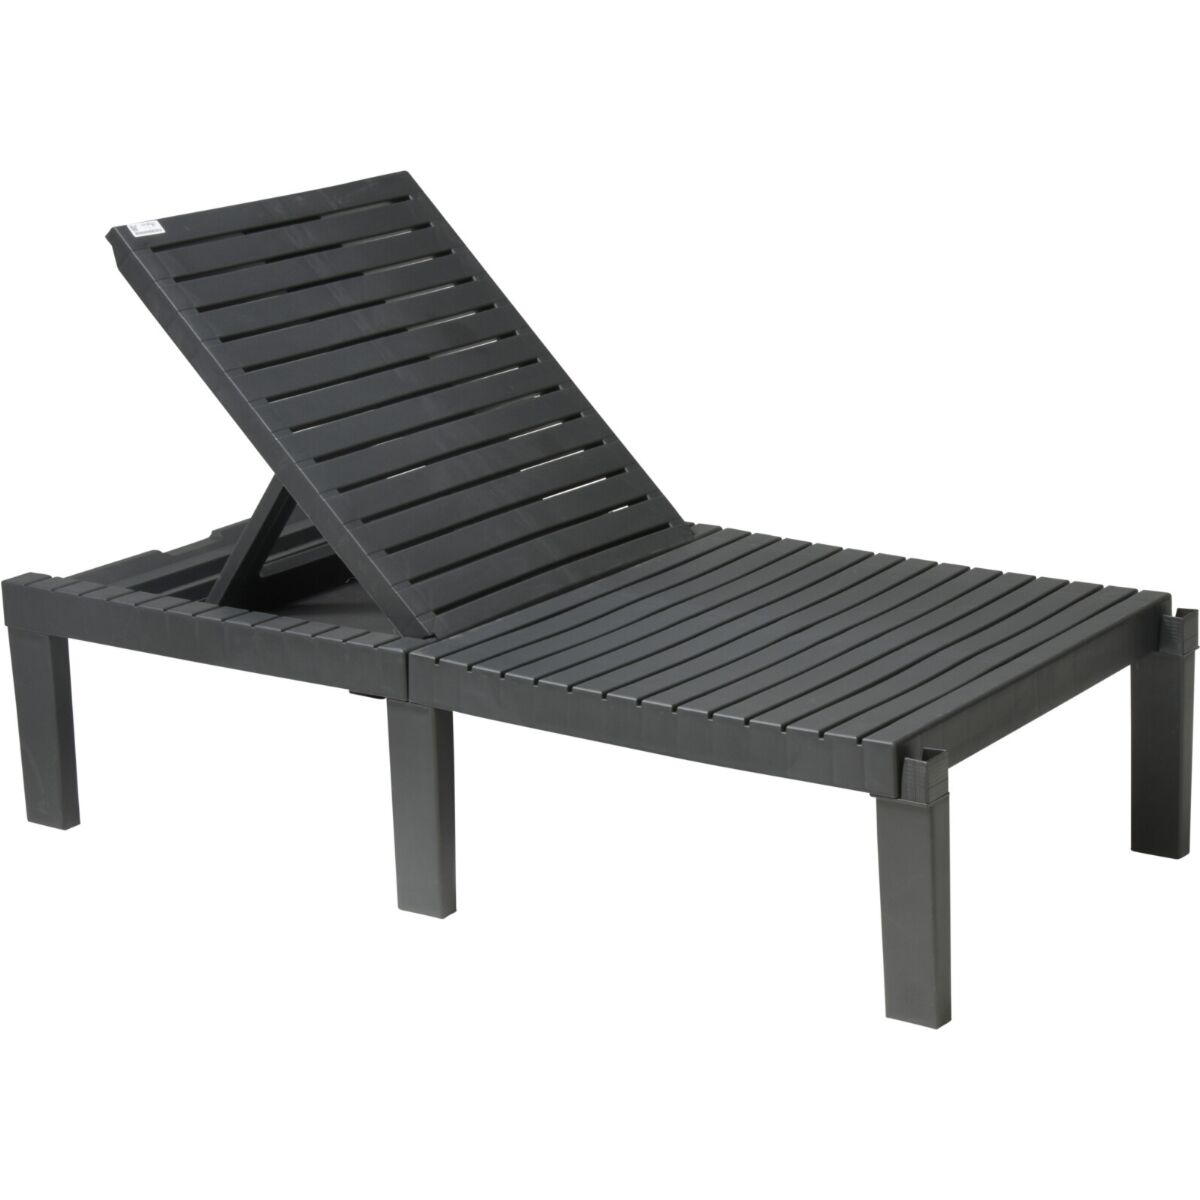 Sunlounger with Cushions - 7 Adjustable Positions